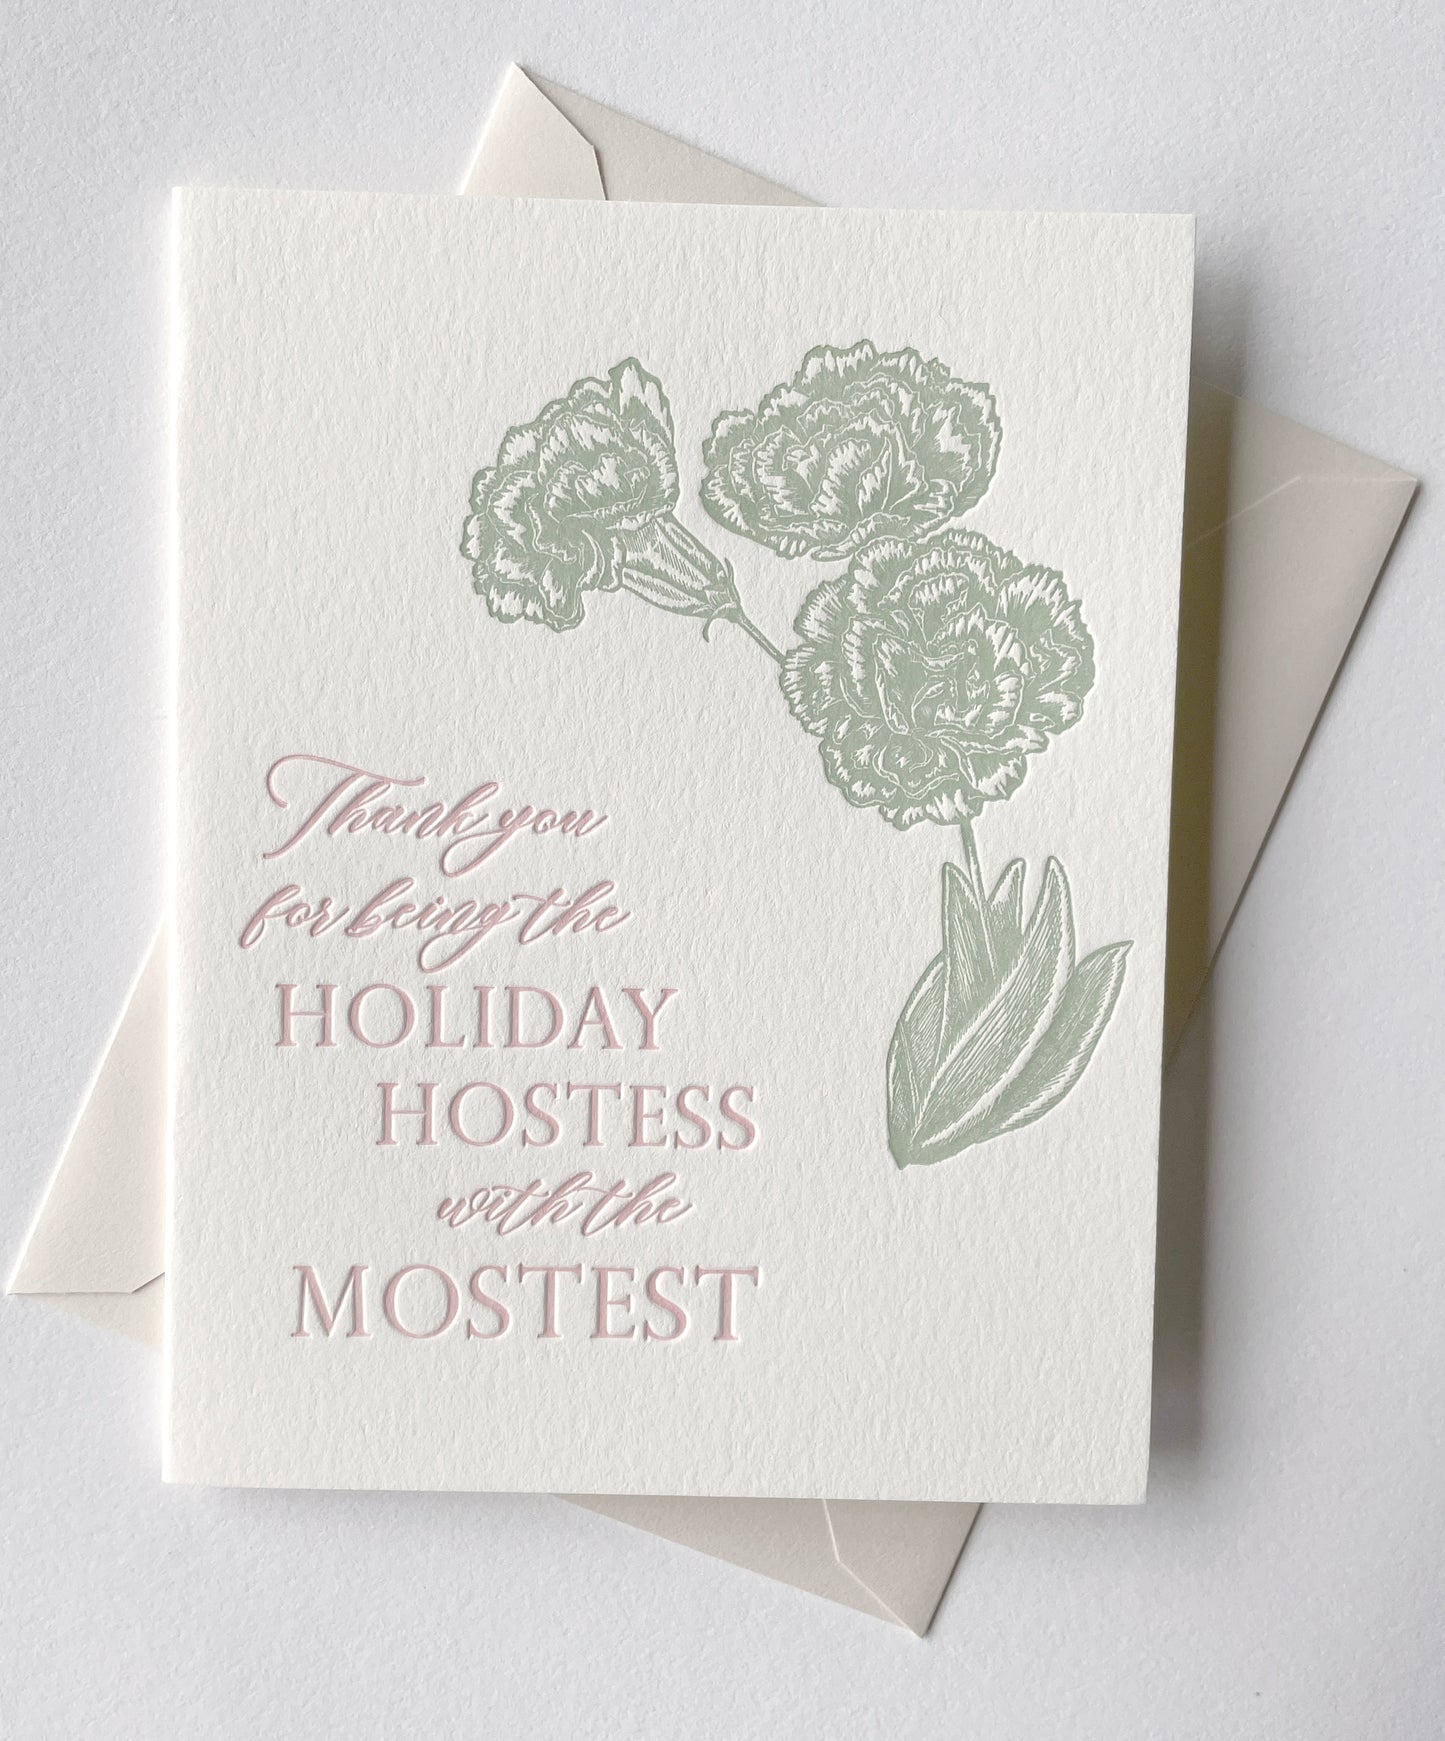 Letterpress holiday card with florals that says "Thank you for being the holiday hostess with the mostest" by Rust Belt Love